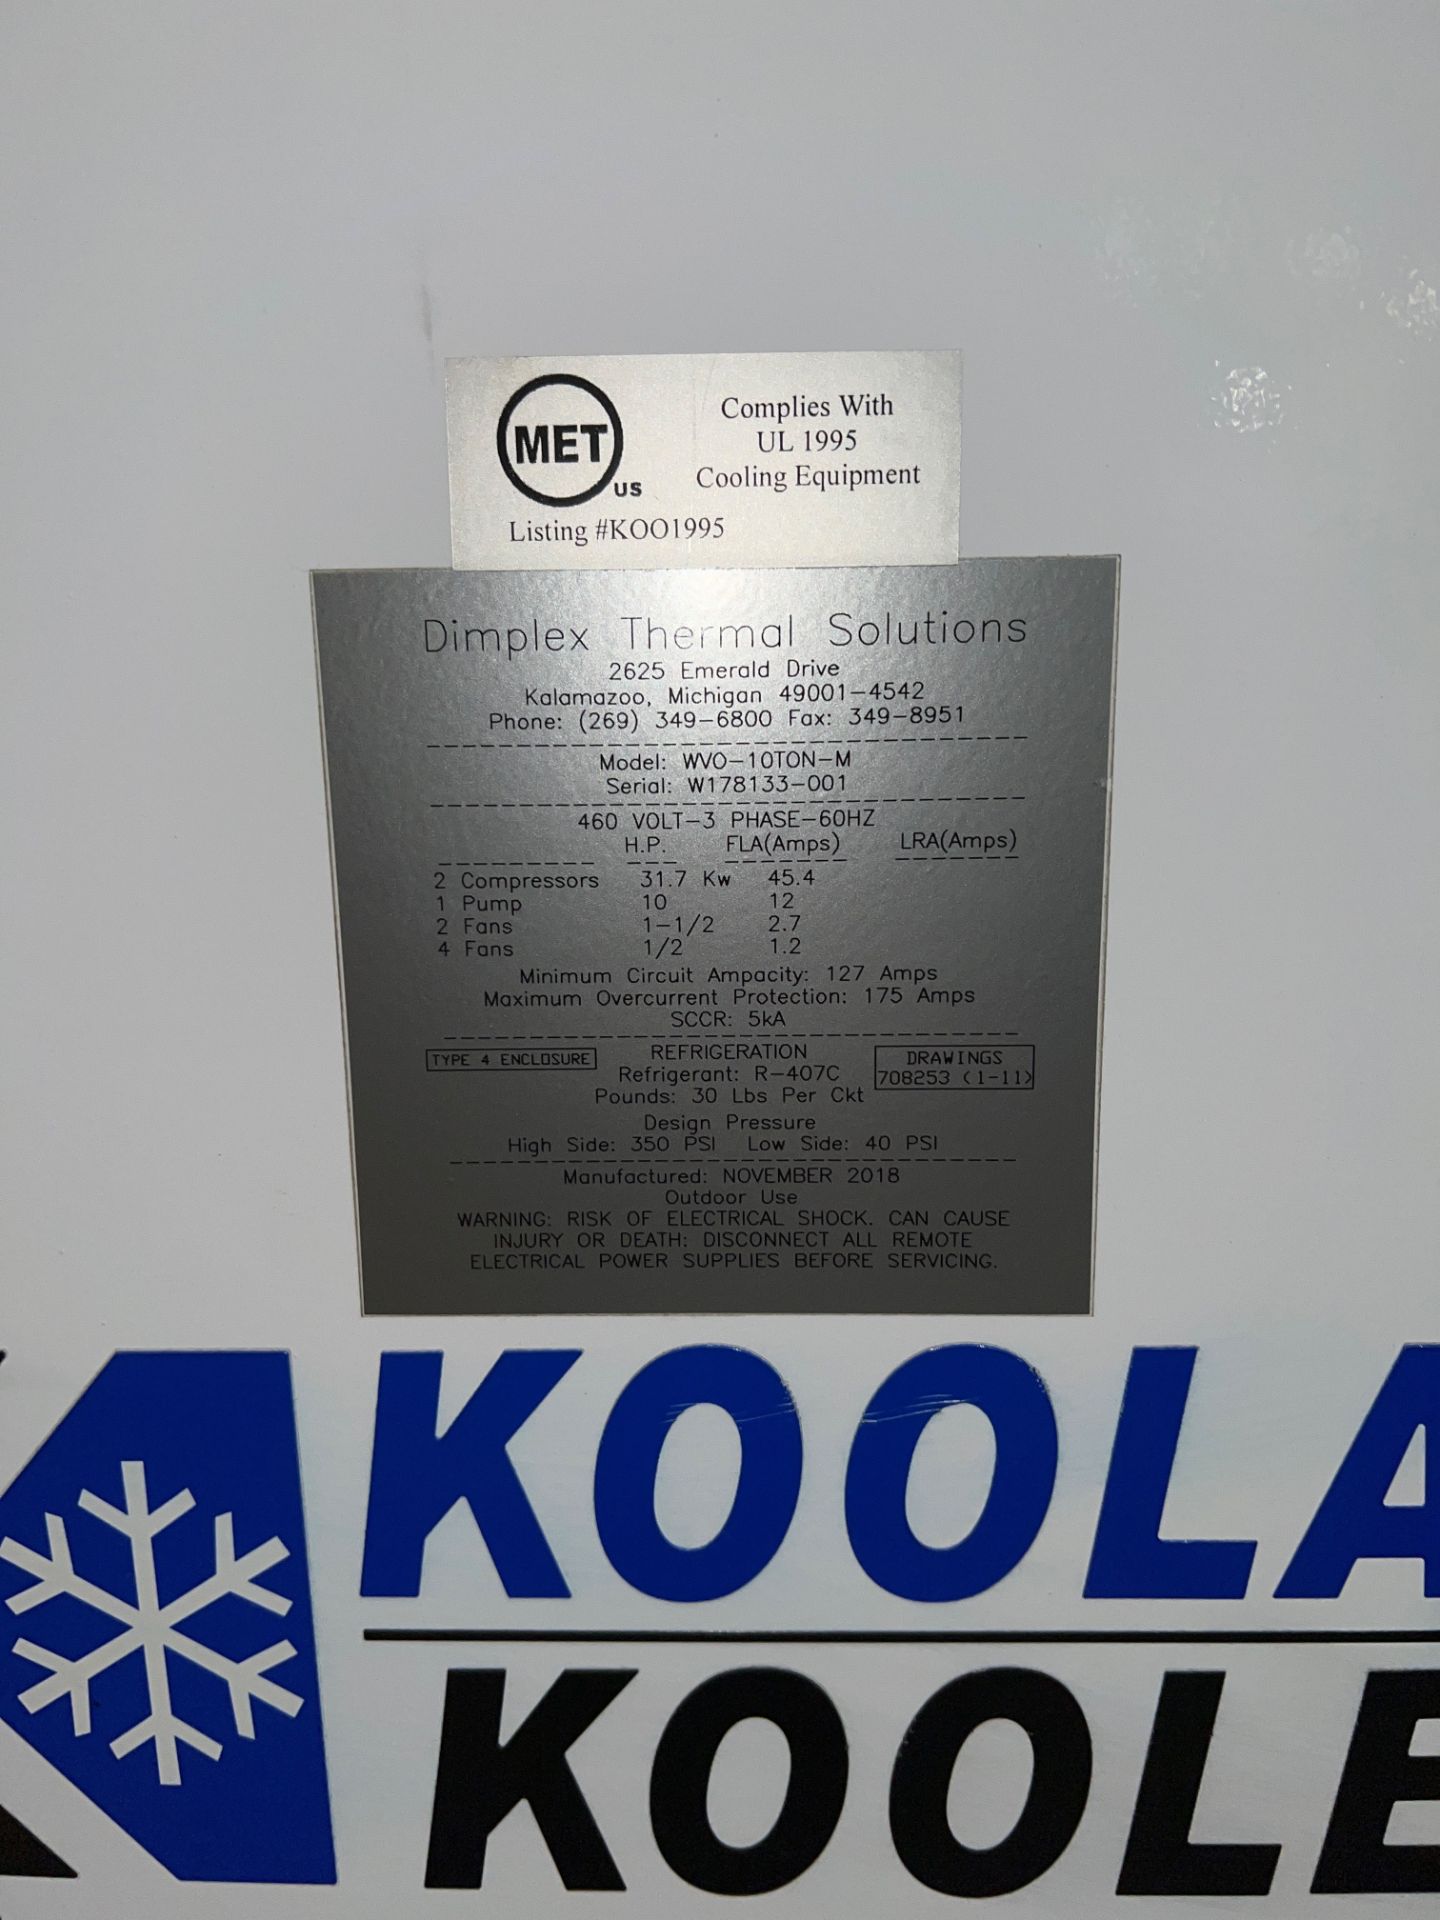 Used Dimplex Koolant Koolers Outdoor Air-Cooled Chiller. Model WVO-10TON-M - Image 2 of 7